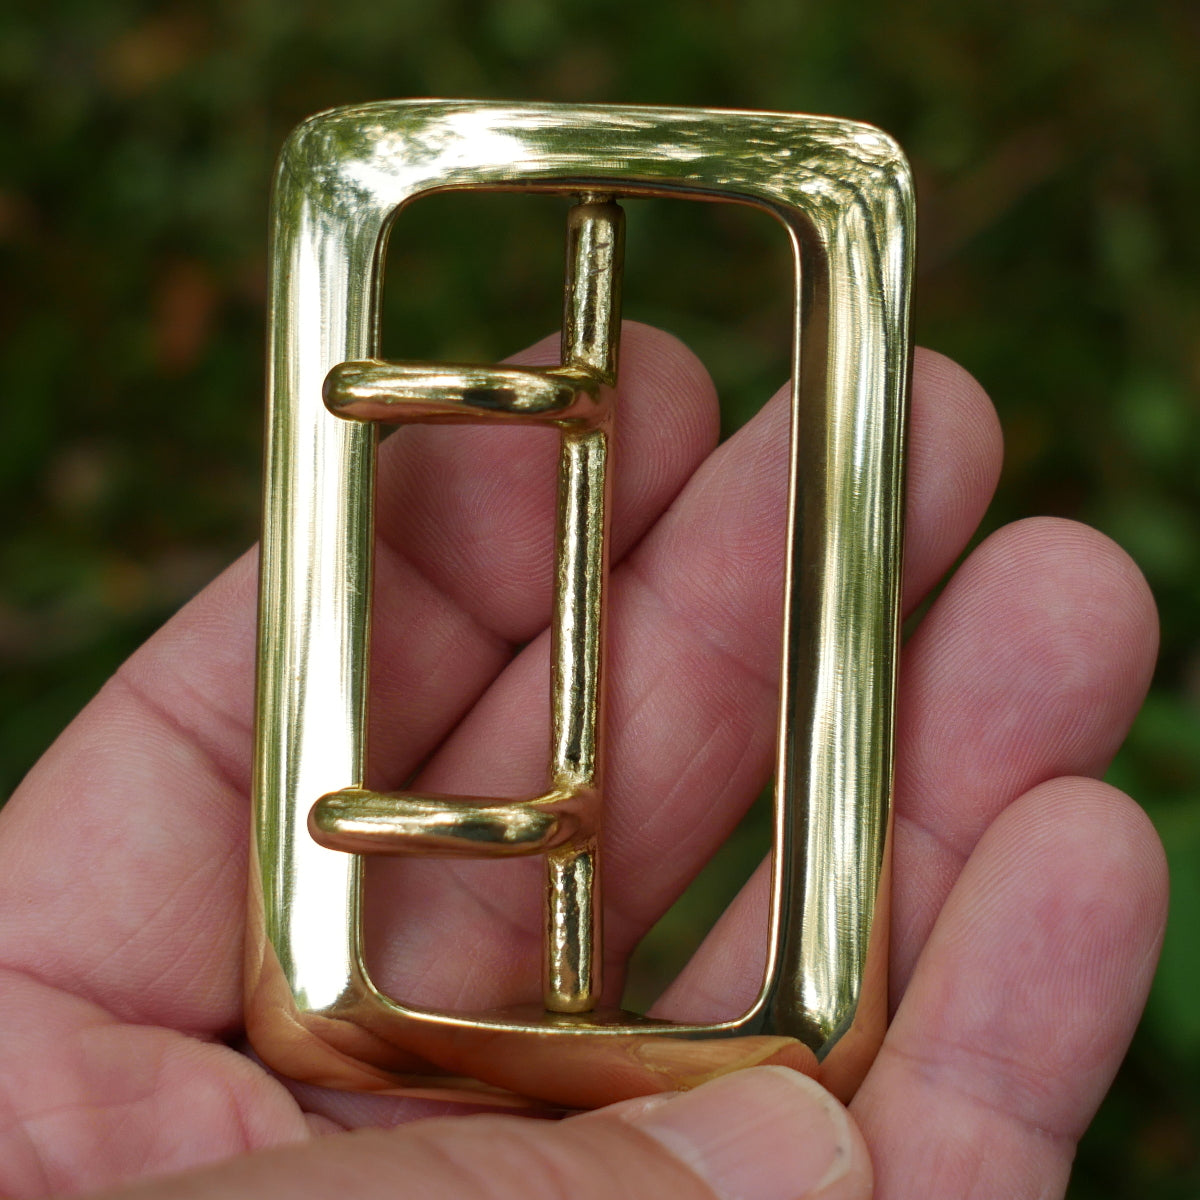 Solid Brass – SOLE MANUFACTURERS OF THE HIGHEST QUALITY SOLID BRASS  BUCKLES,COASTERS , KEYHOLDERS AND LEATHER BELTS IN SOUTH AFRICA.